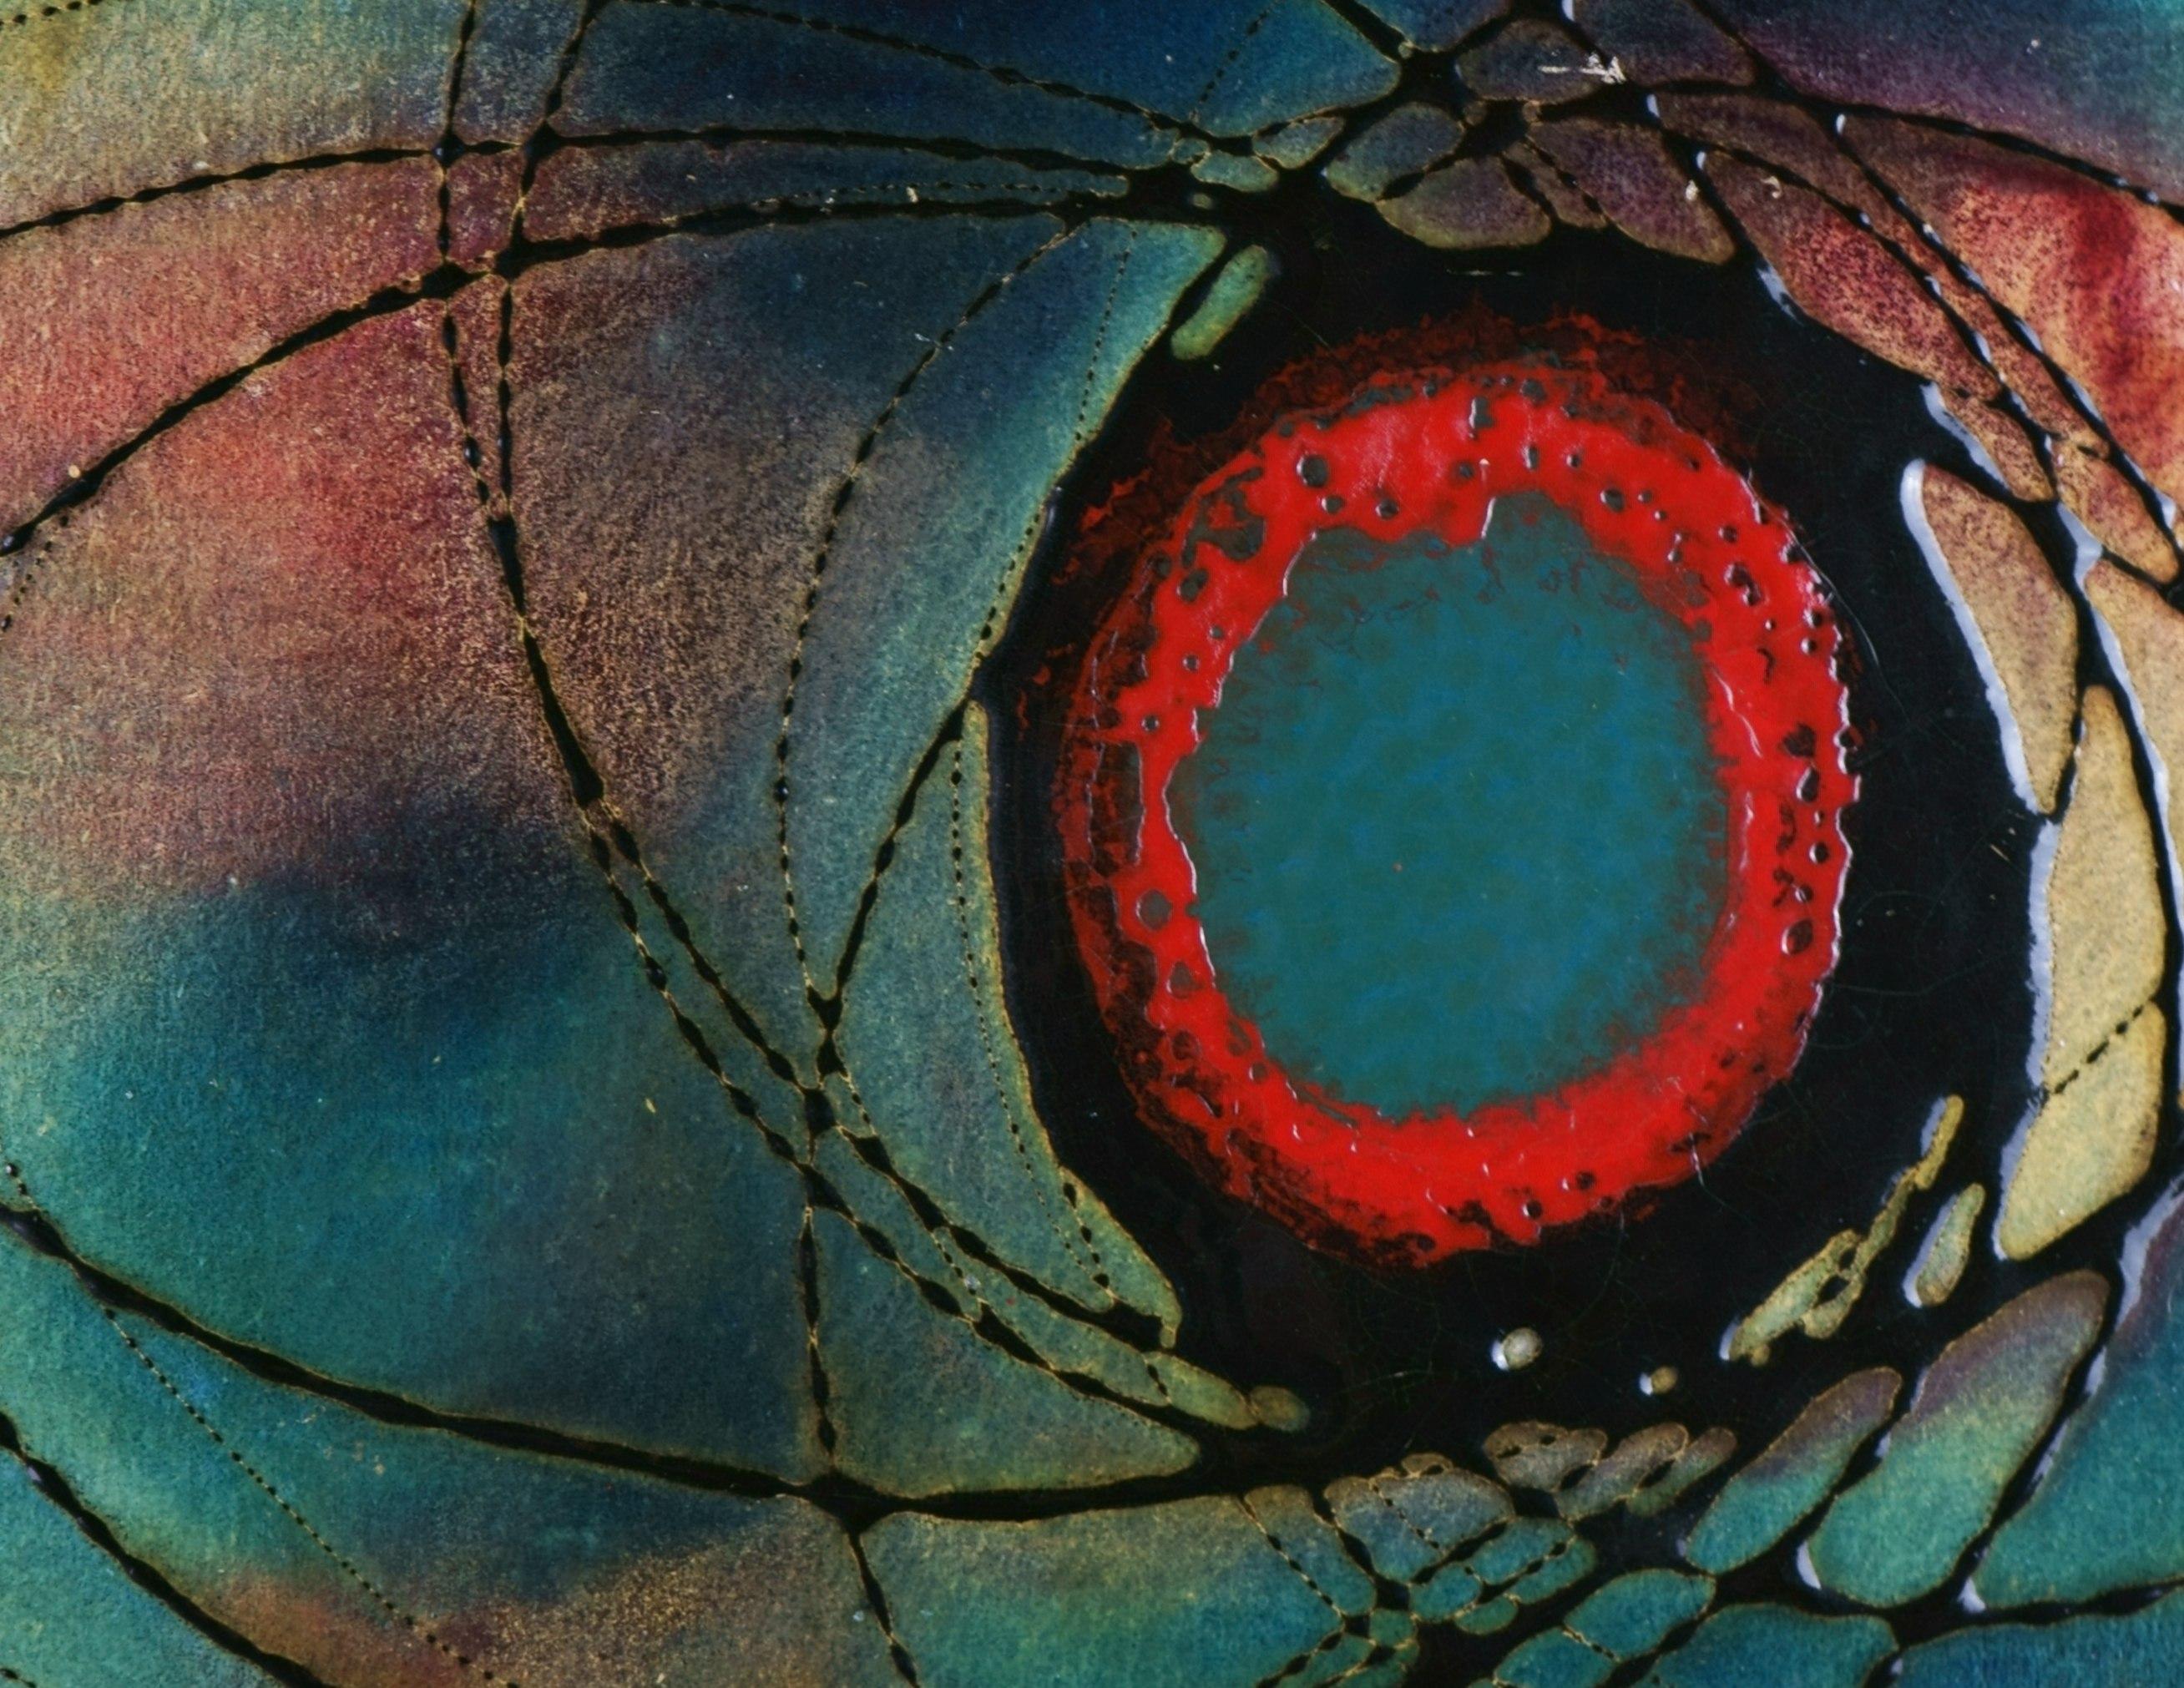 Eccentric discharges of a blue-red core / - Energetic traces - - Abstract Painting by Klaus Oldenburg